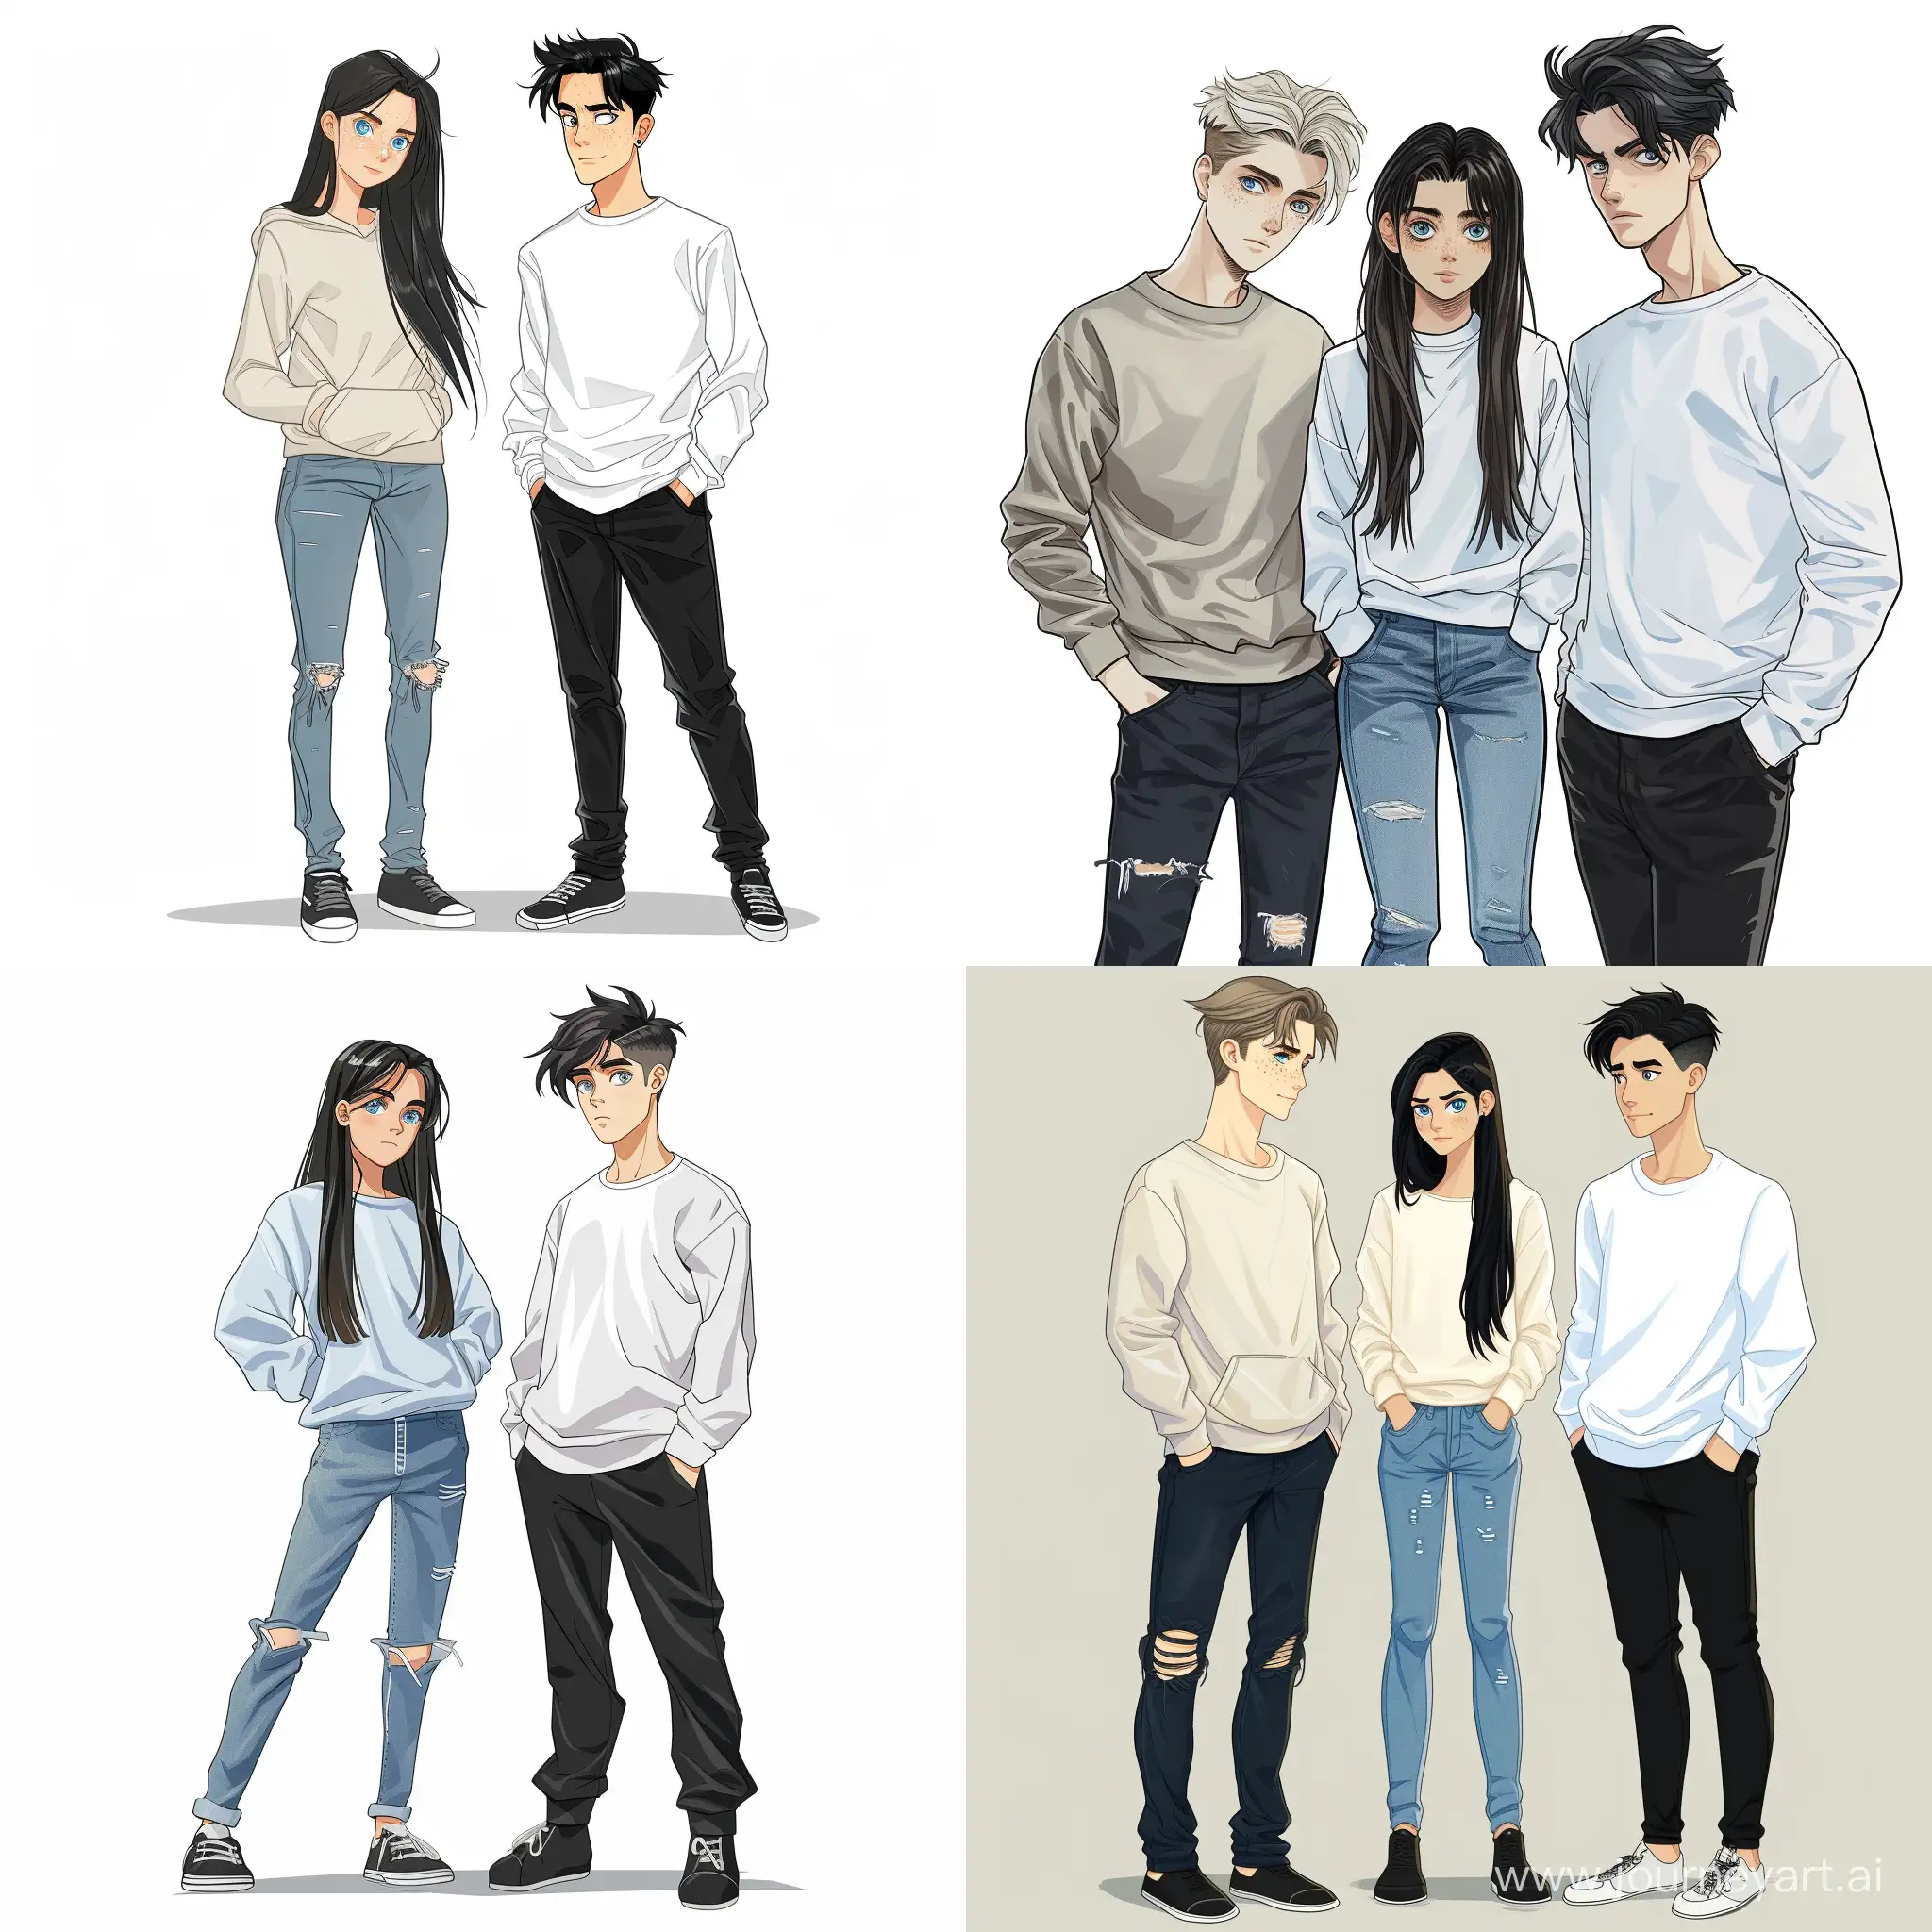 Friendship, two guys, one girl, Beautiful girl, straight dark hair, blue eyes, white skin, teenager, 15 years old, jeans and sweatshirt, handsome guy, disheveled blond hair, brown eyes, freckles, standing with his hands in his pants pockets, whatever, handsome guy, black hair styled in a neat hairstyle, gray eyes, white shirt, black pants, arrogant, full length, high quality, high detail, cartoon art